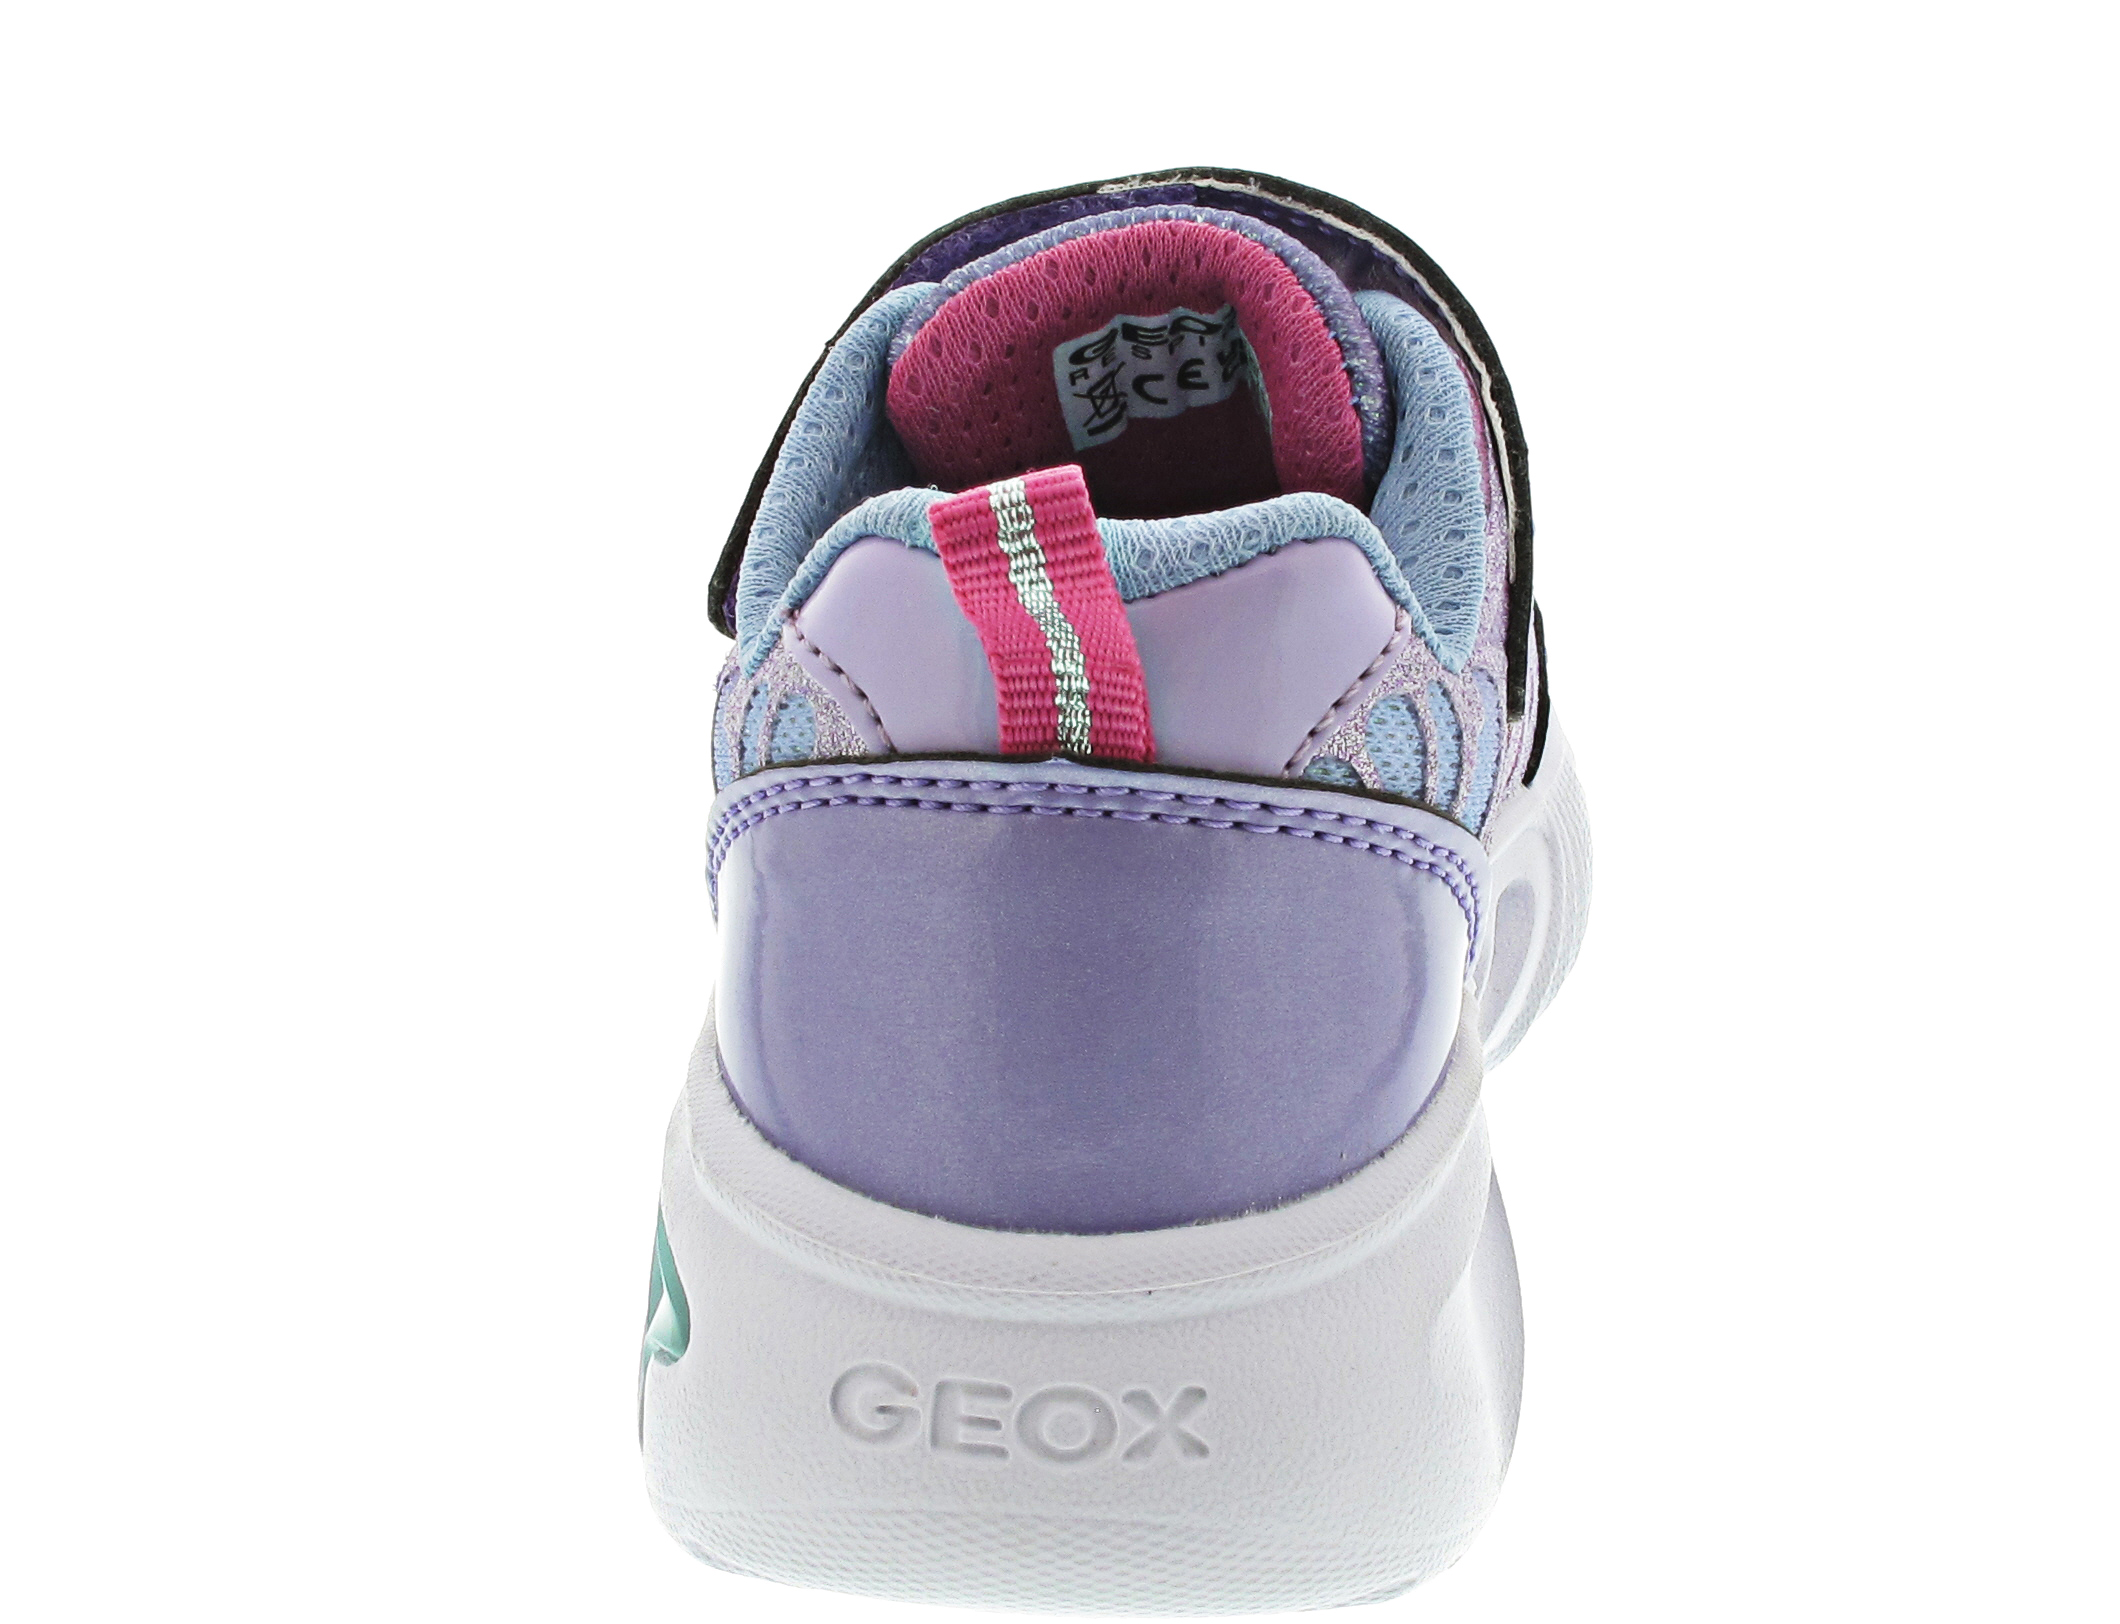 Geox Assister Girl